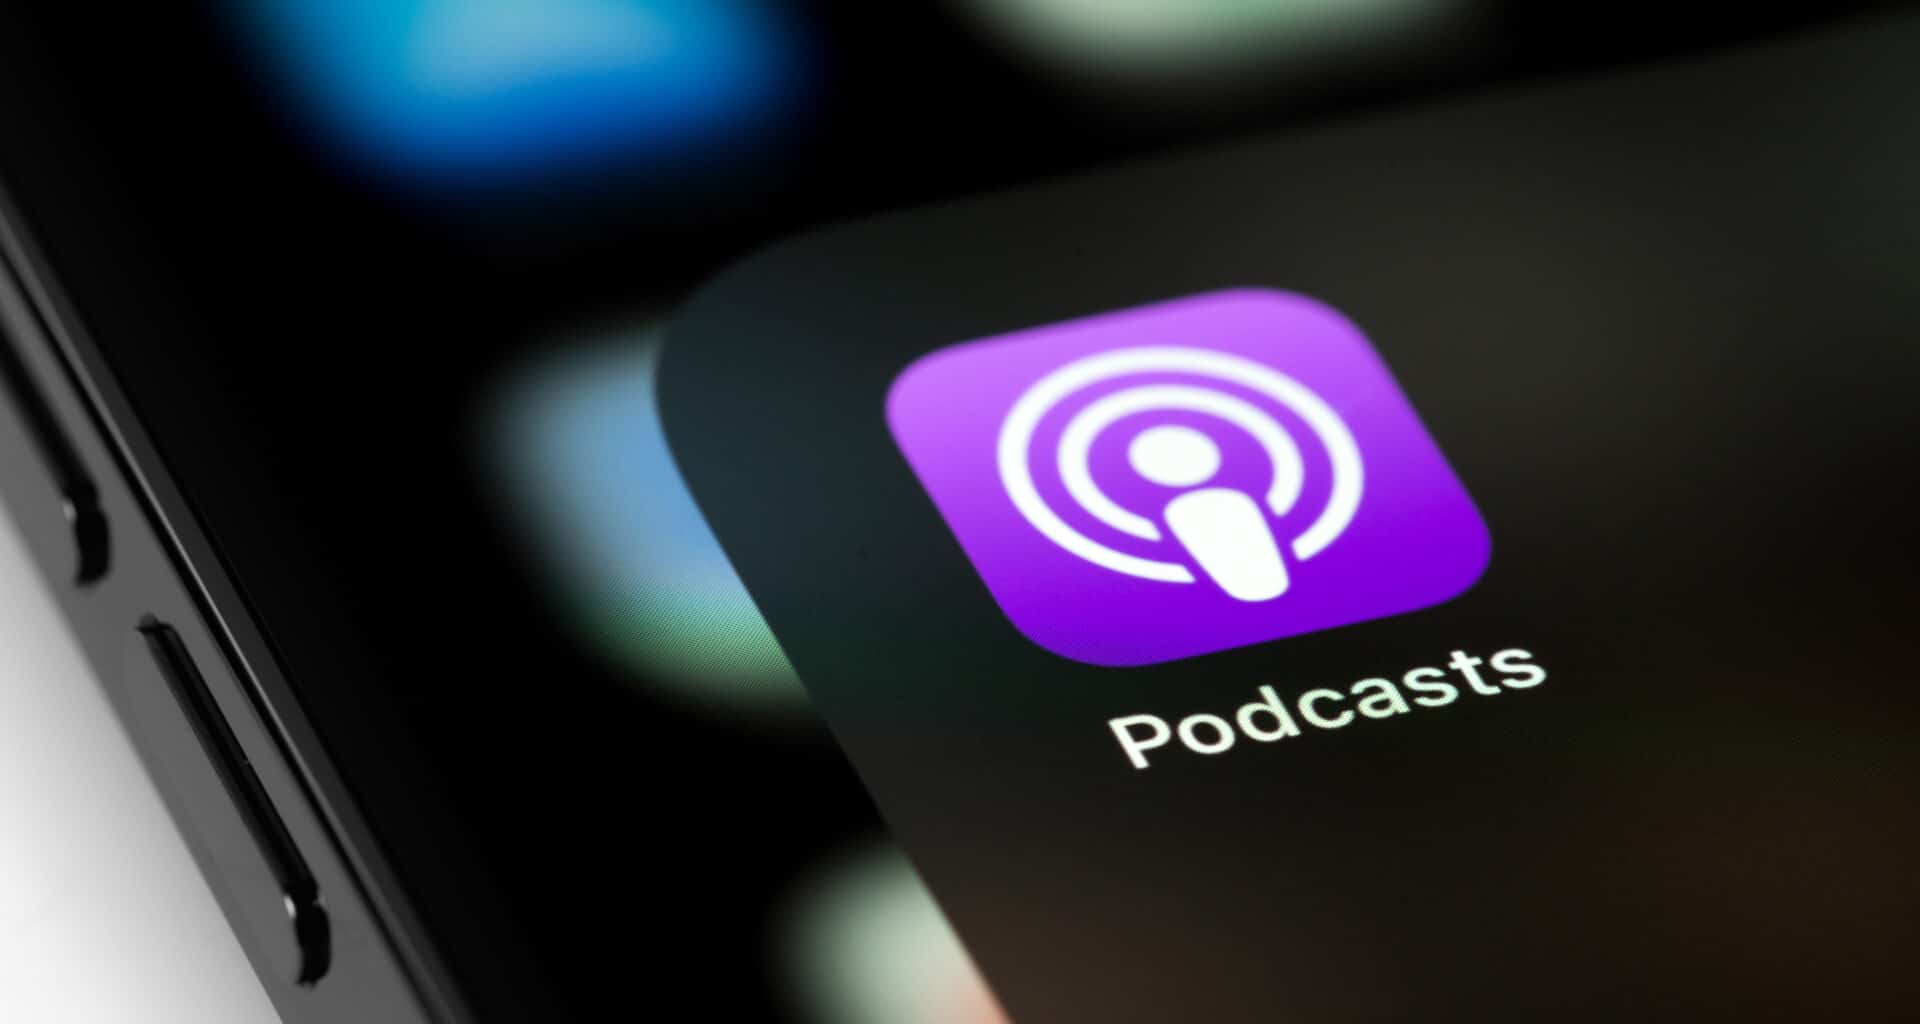 App Podcasts